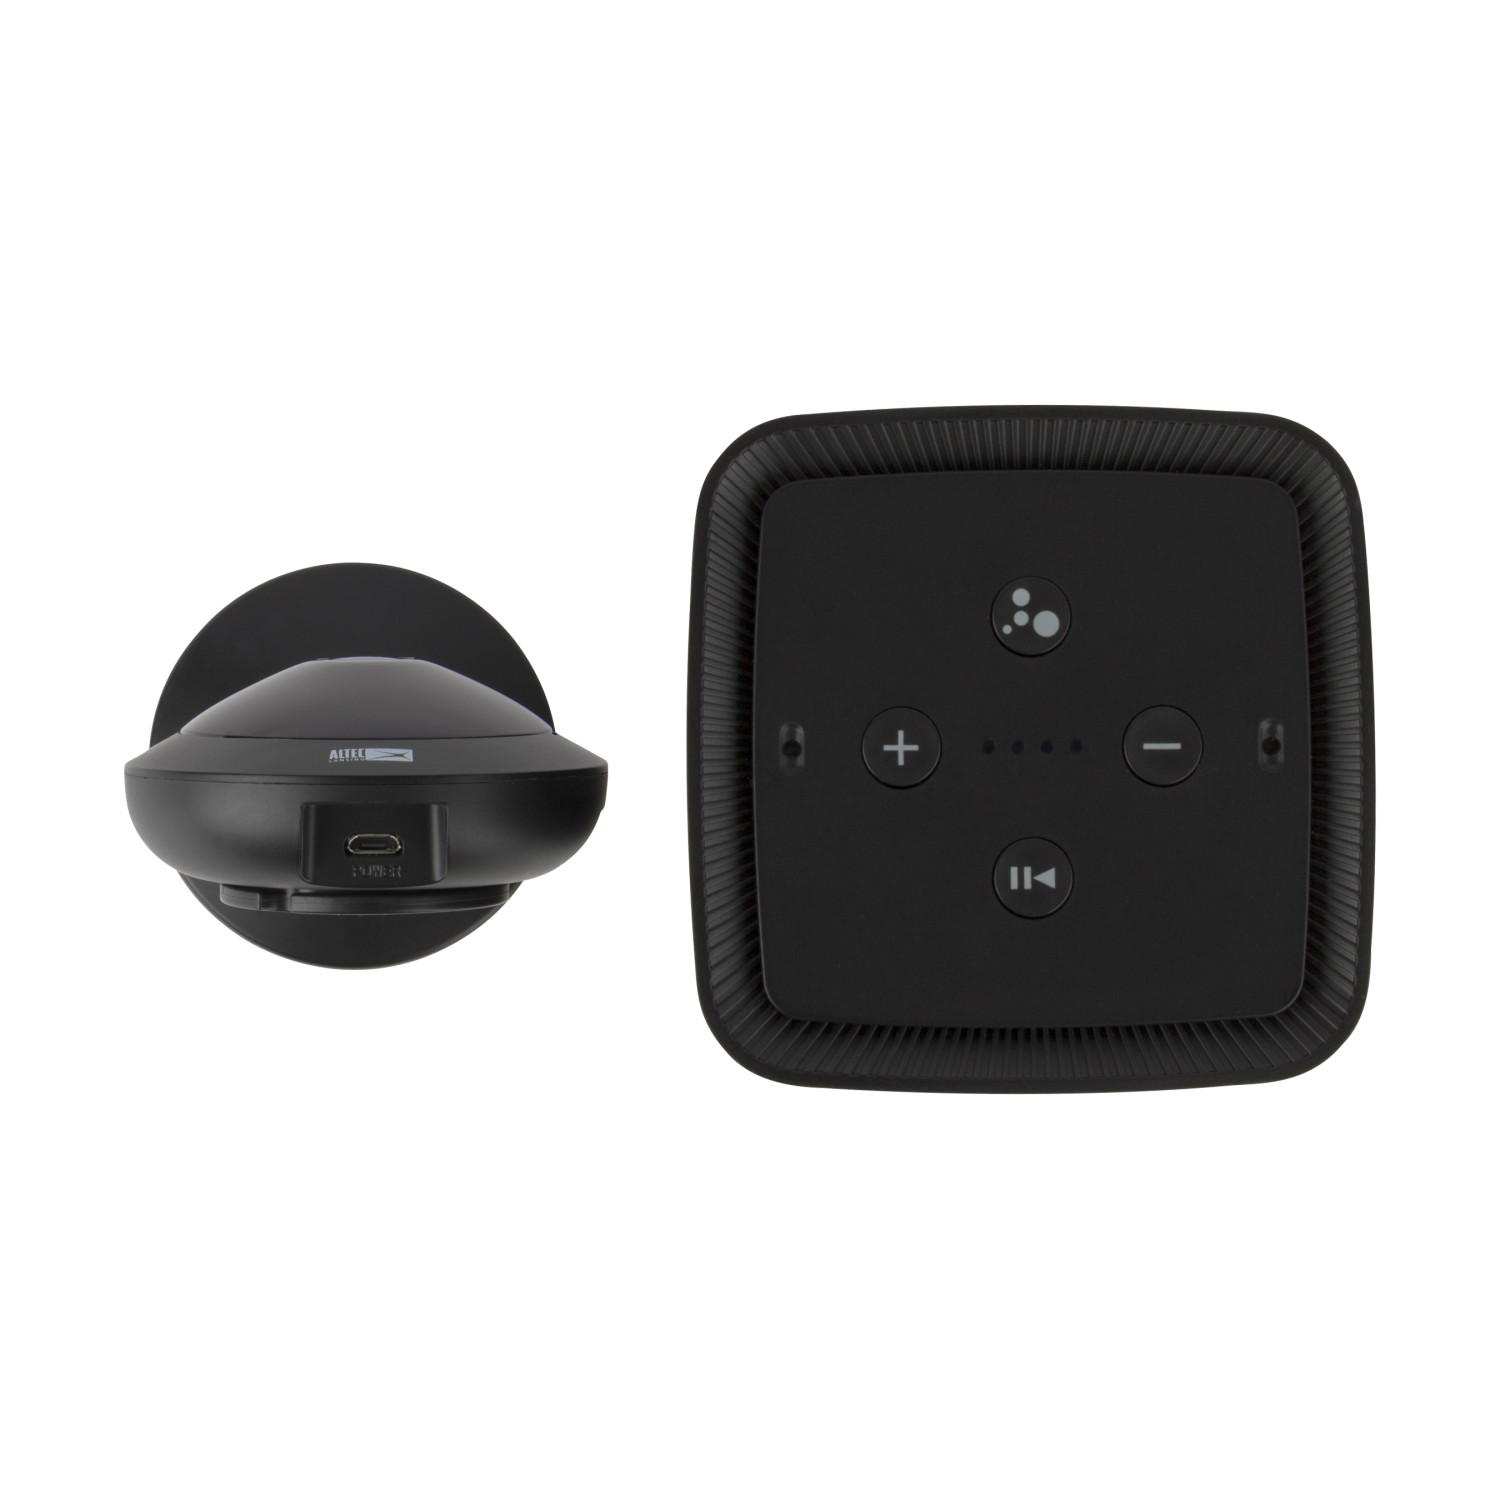 Altec Lansing Voice Activated Smart Security System bundle - image 4 of 4